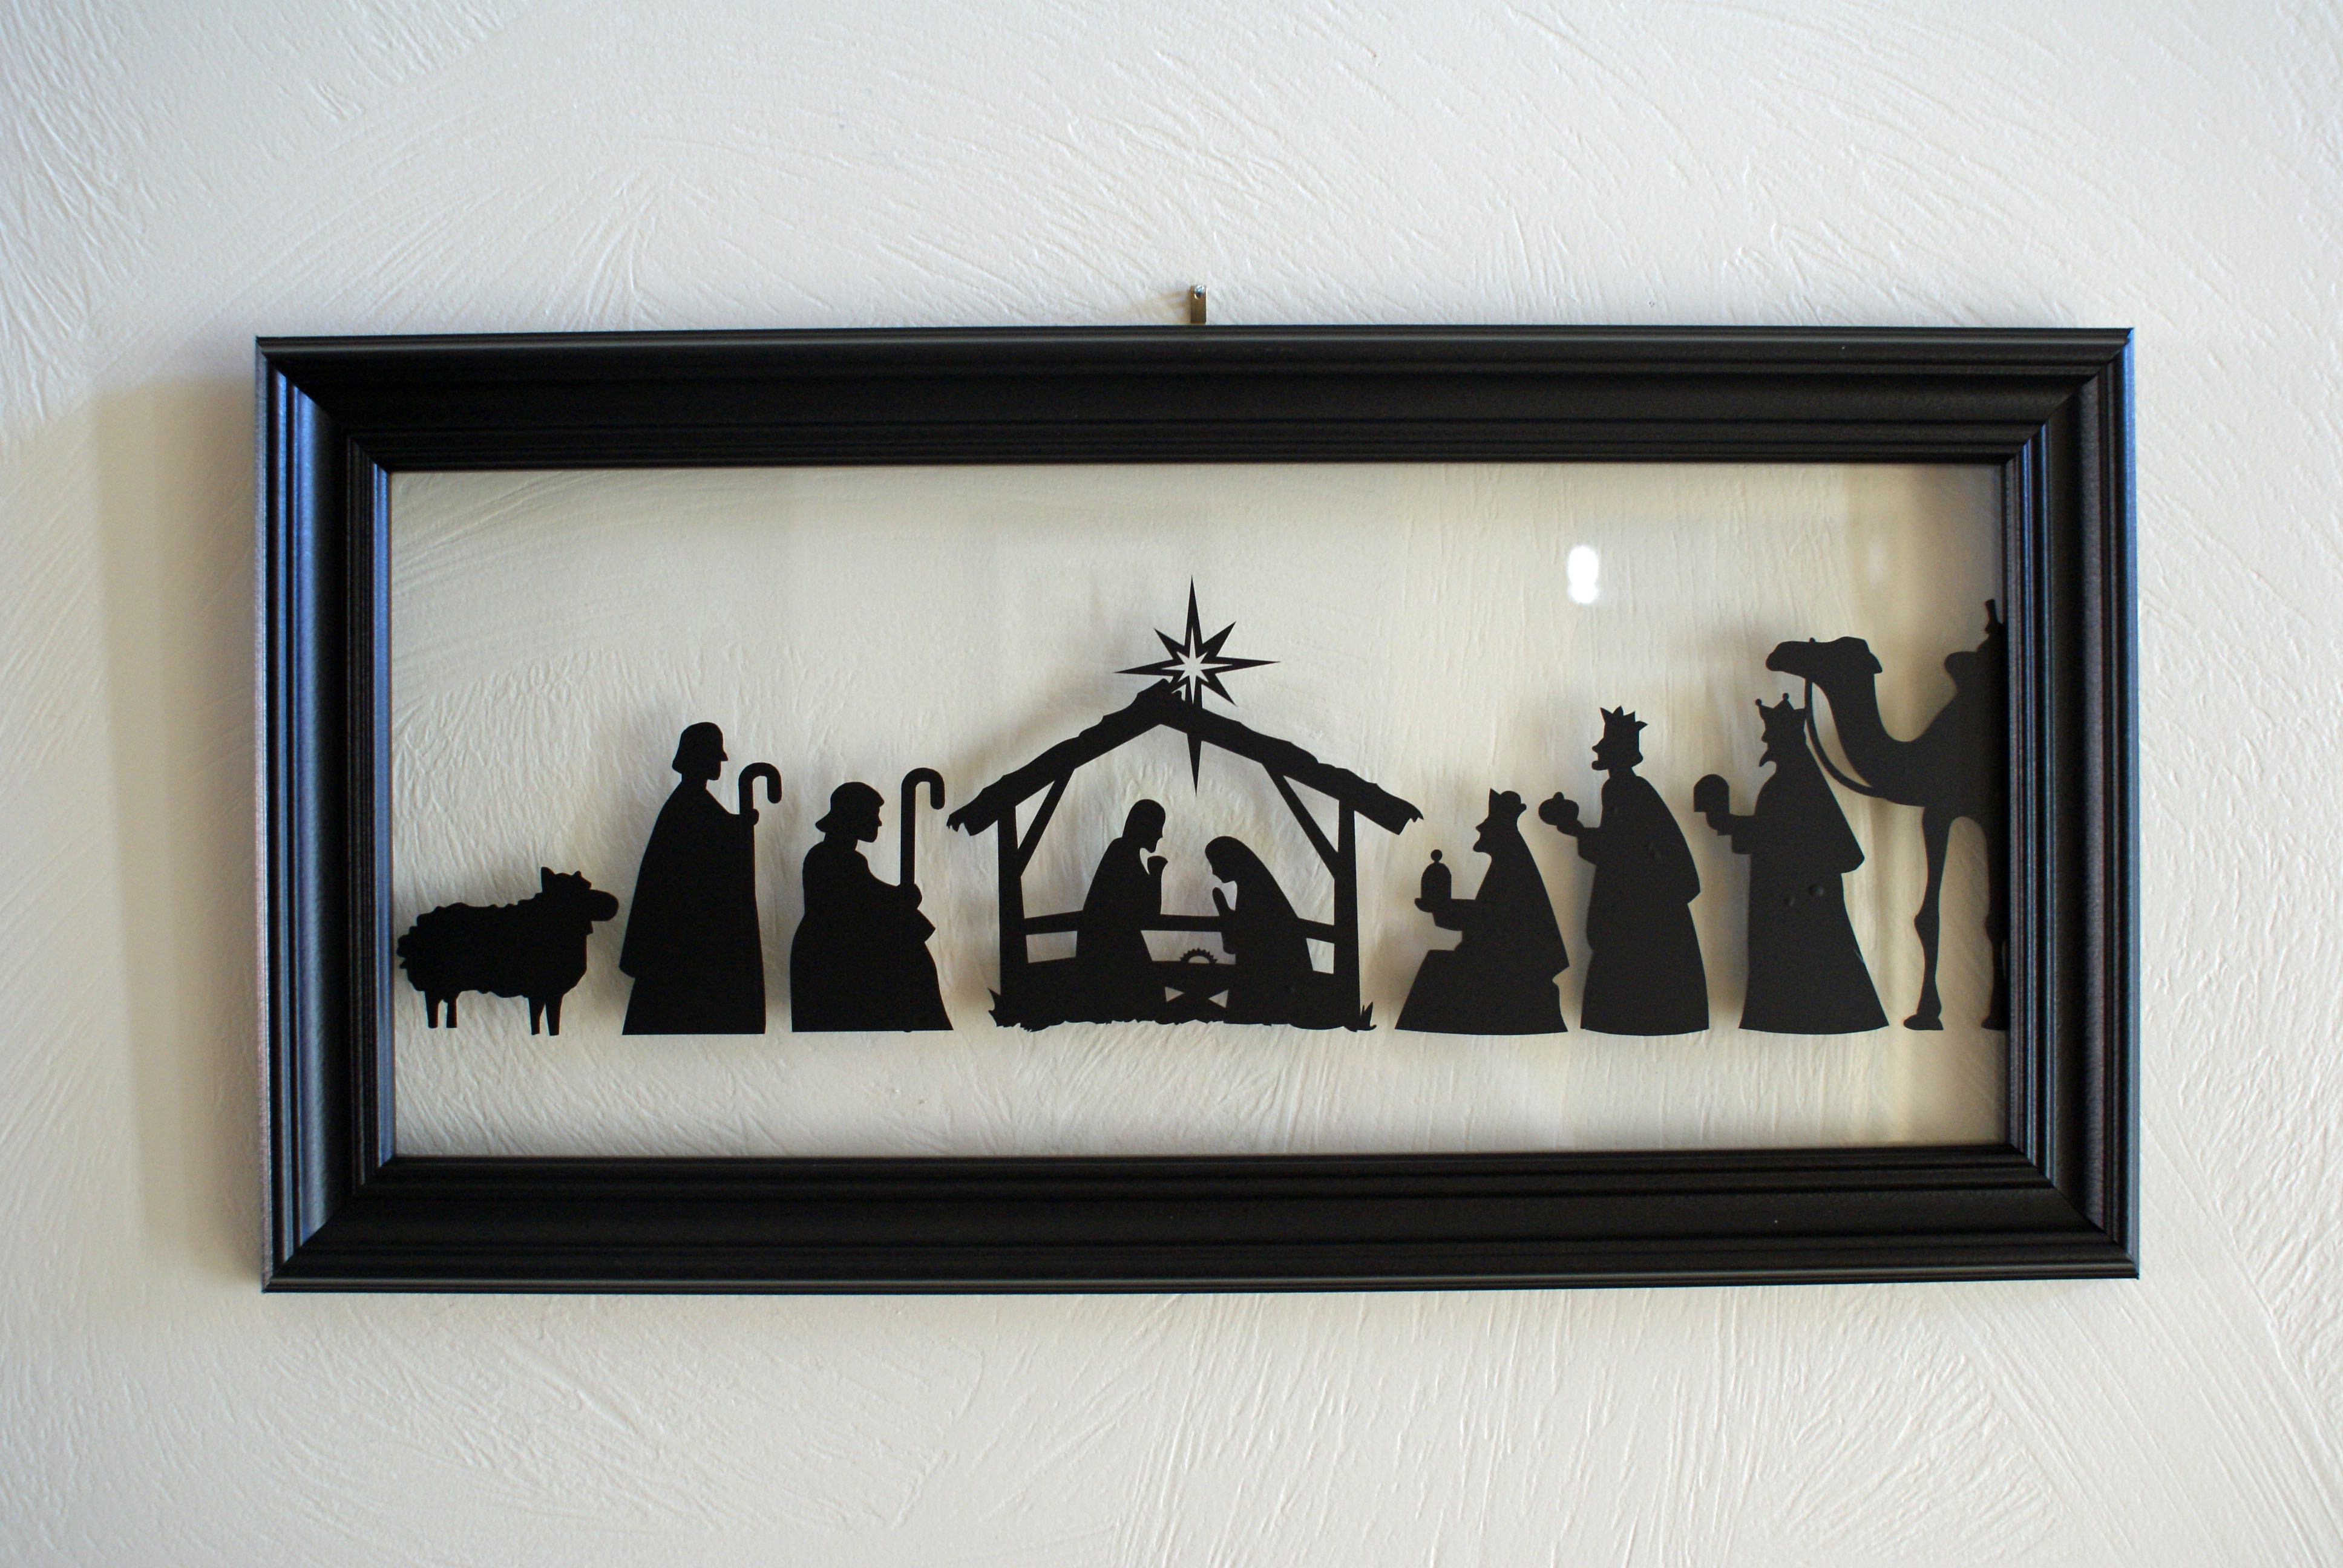 Nativity Scene (Project No. 7) - Holiday Yard Display Poster Project